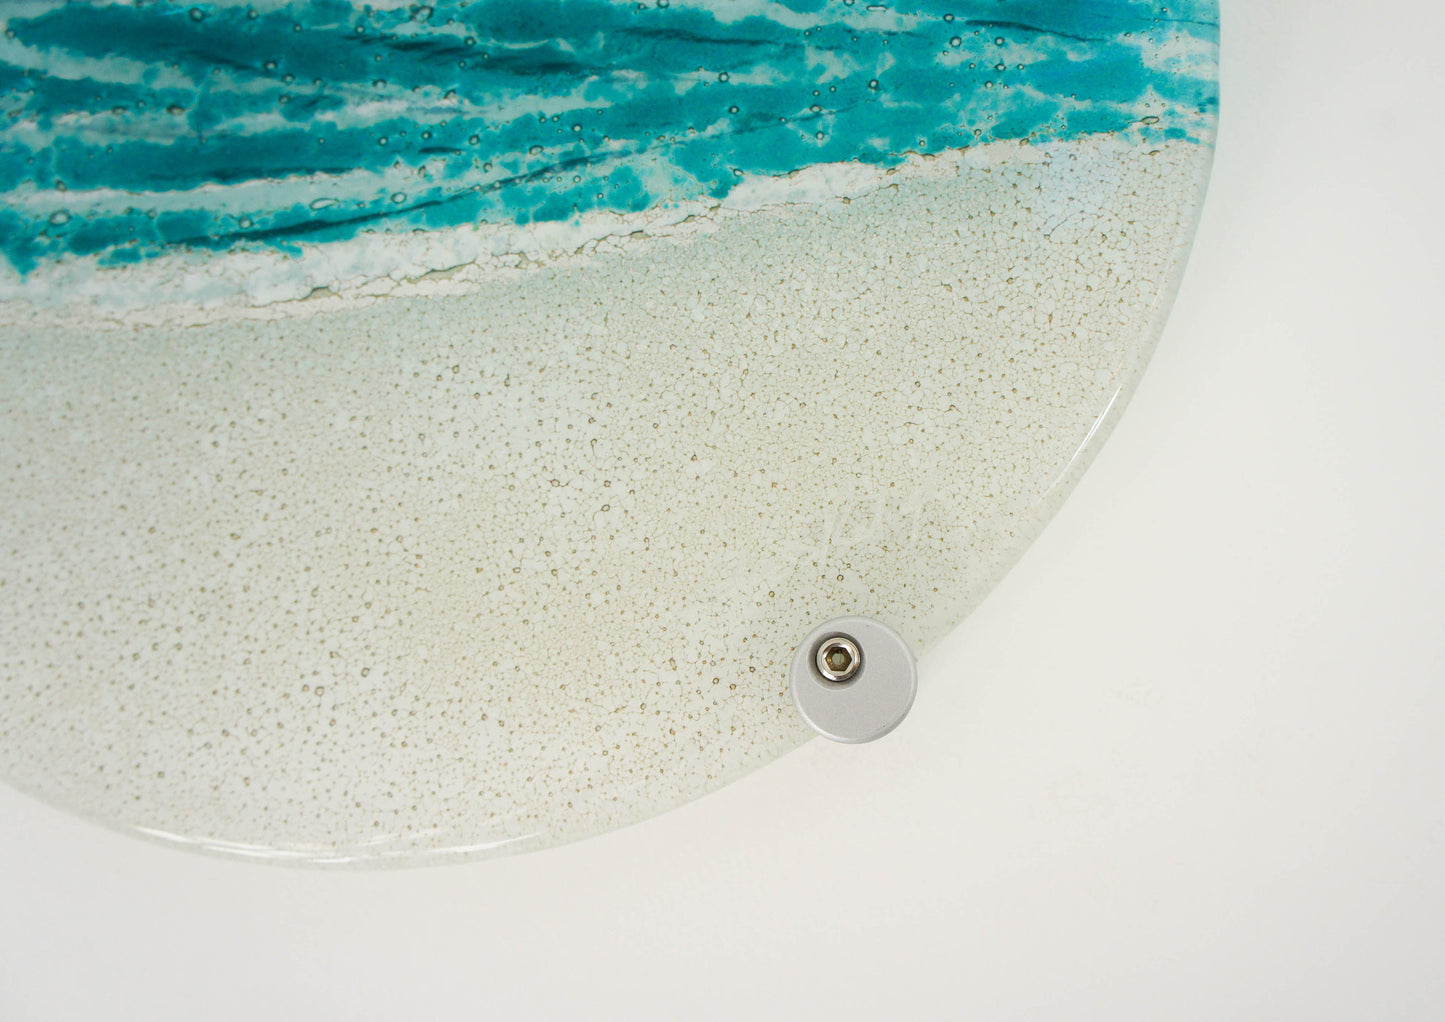 Turquoise Beach Panel - Round - 29cm (10 1/2") with fixings